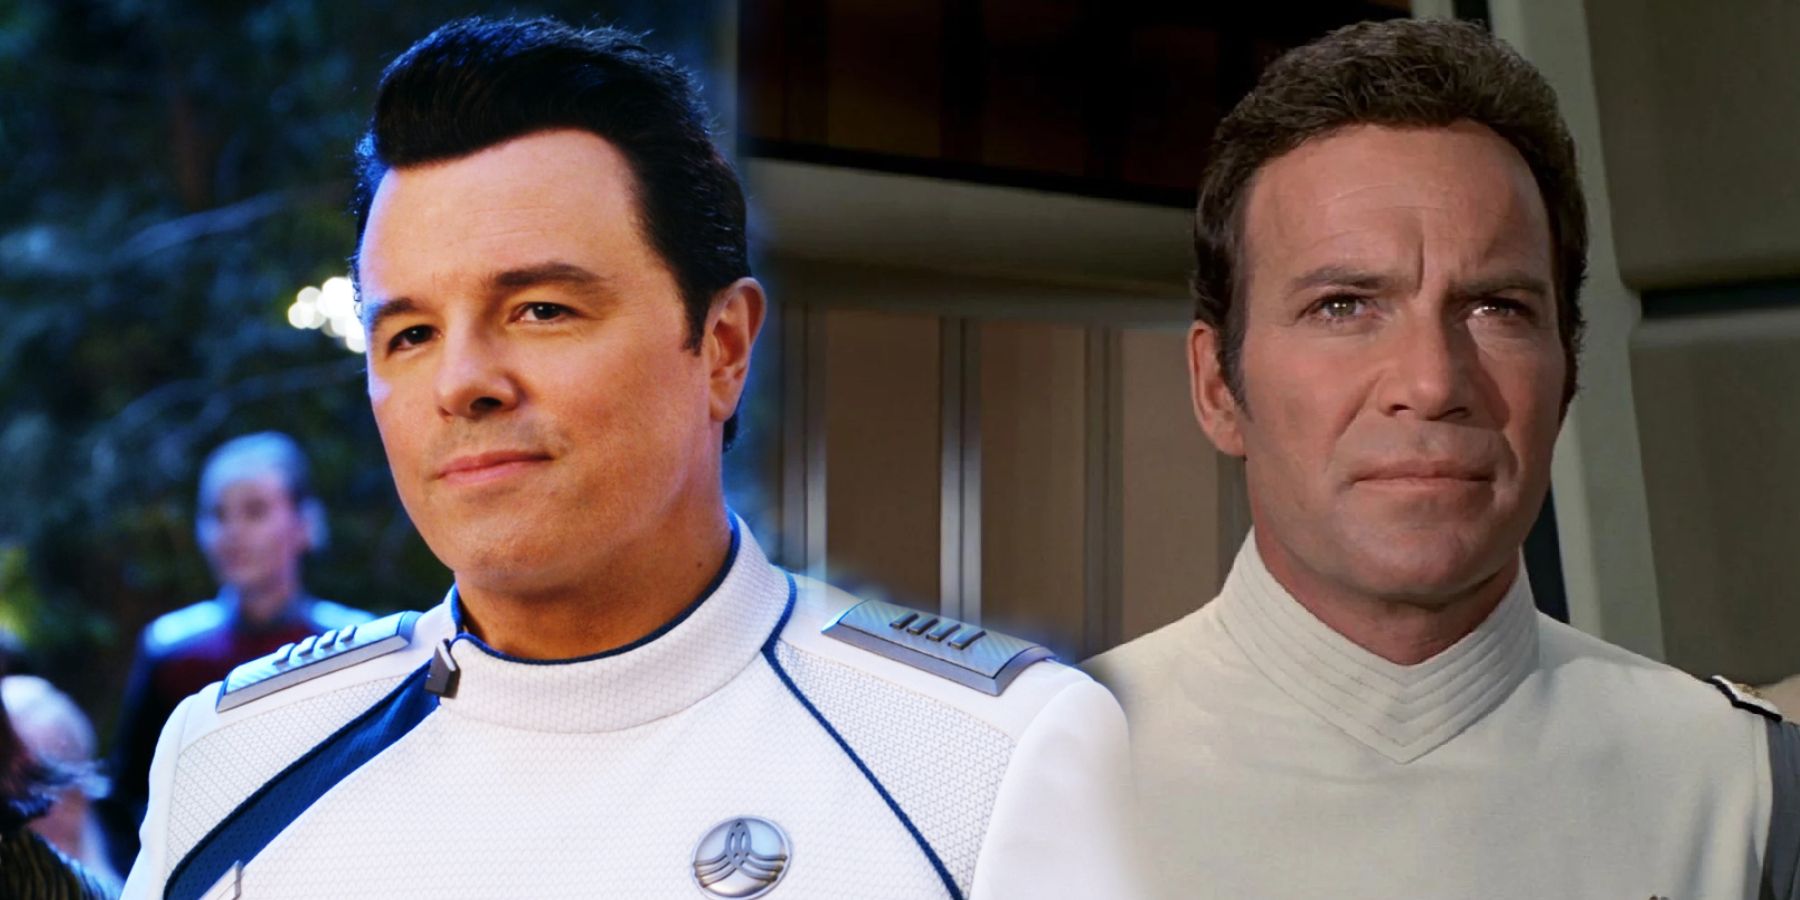 Seth MacFarlane in The Orville and William Shatner in Star Trek: The Motion Picture